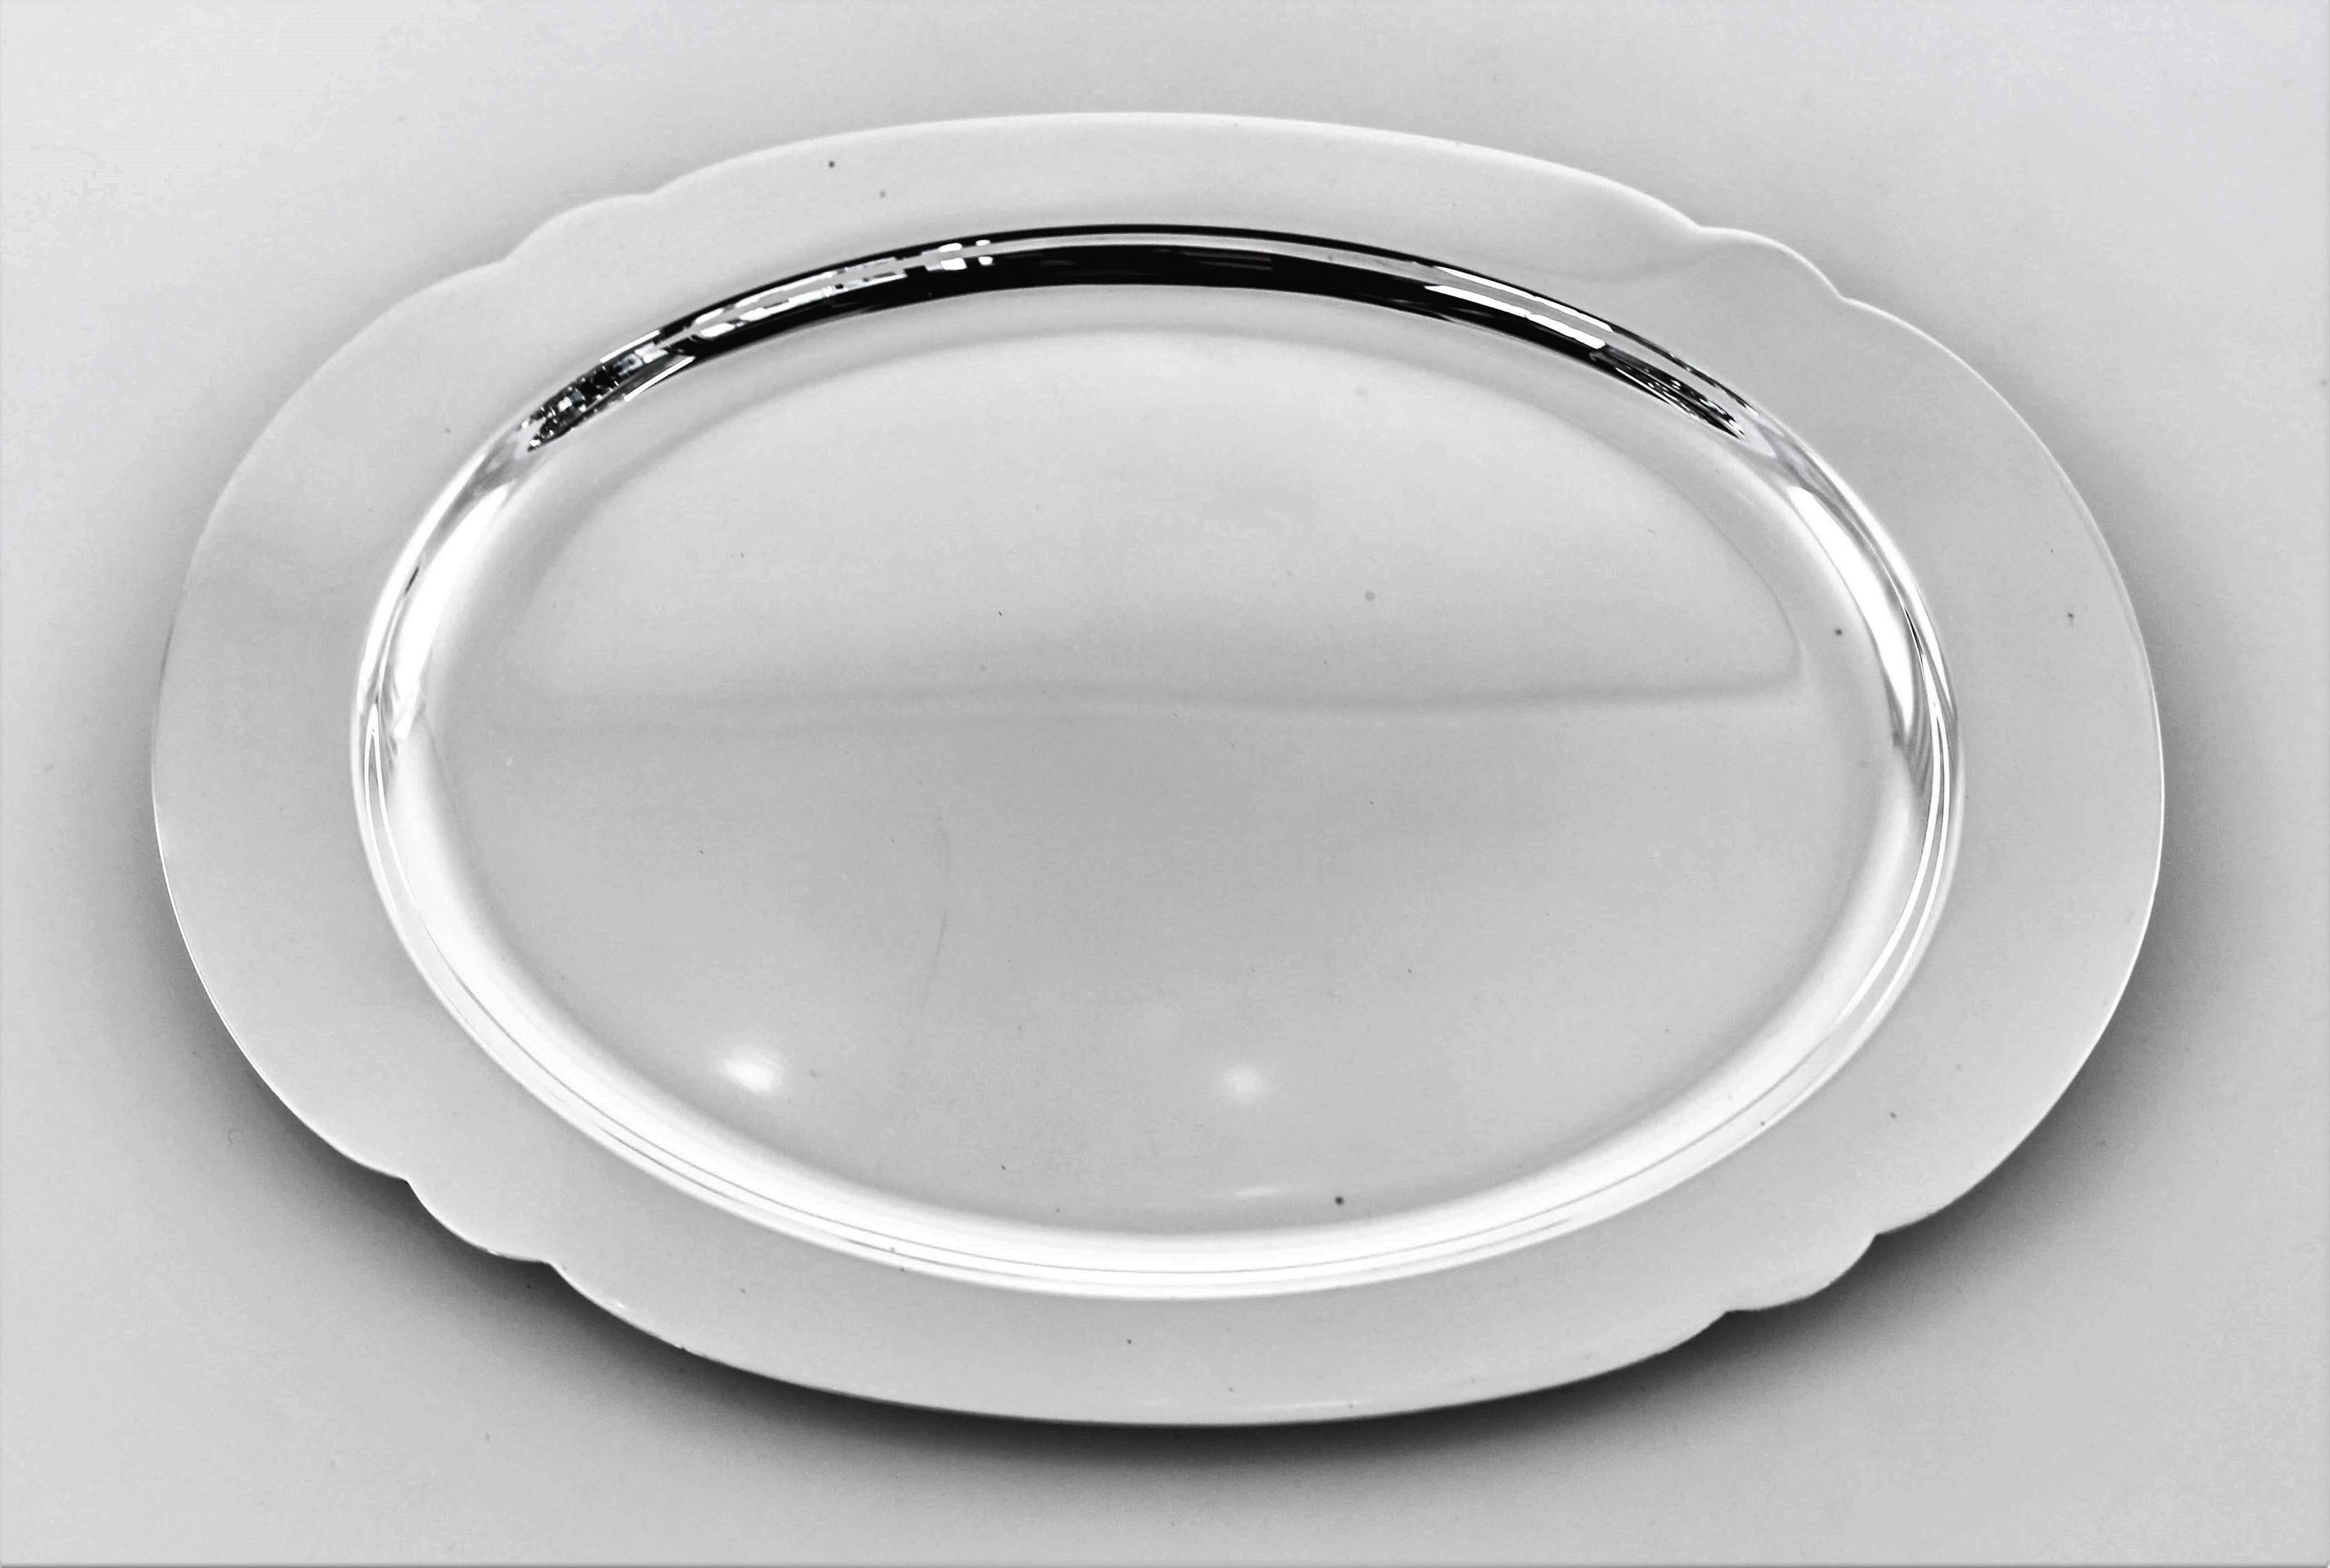 A soft scalloped edge and a flat surface make for the perfect serving dish. Used as a pair or separately these ultra smooth dishes will look nice on your coffee table. It’s all about the sterling because there’s no design or decorative pattern to